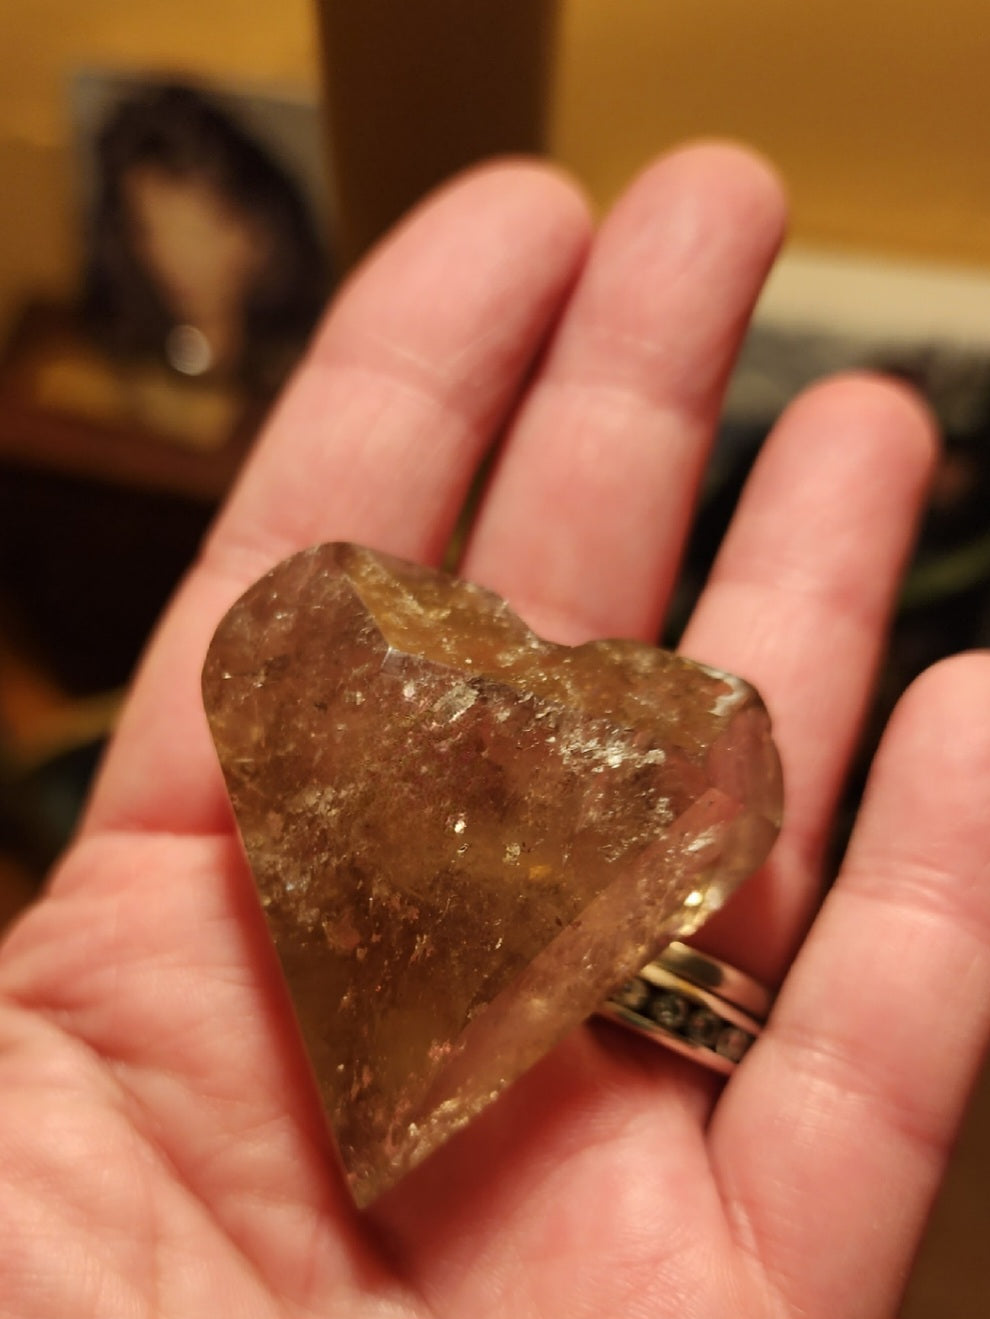 Smoky Quartz Carved Heart for Physical Protection as Well as Emotional Strength